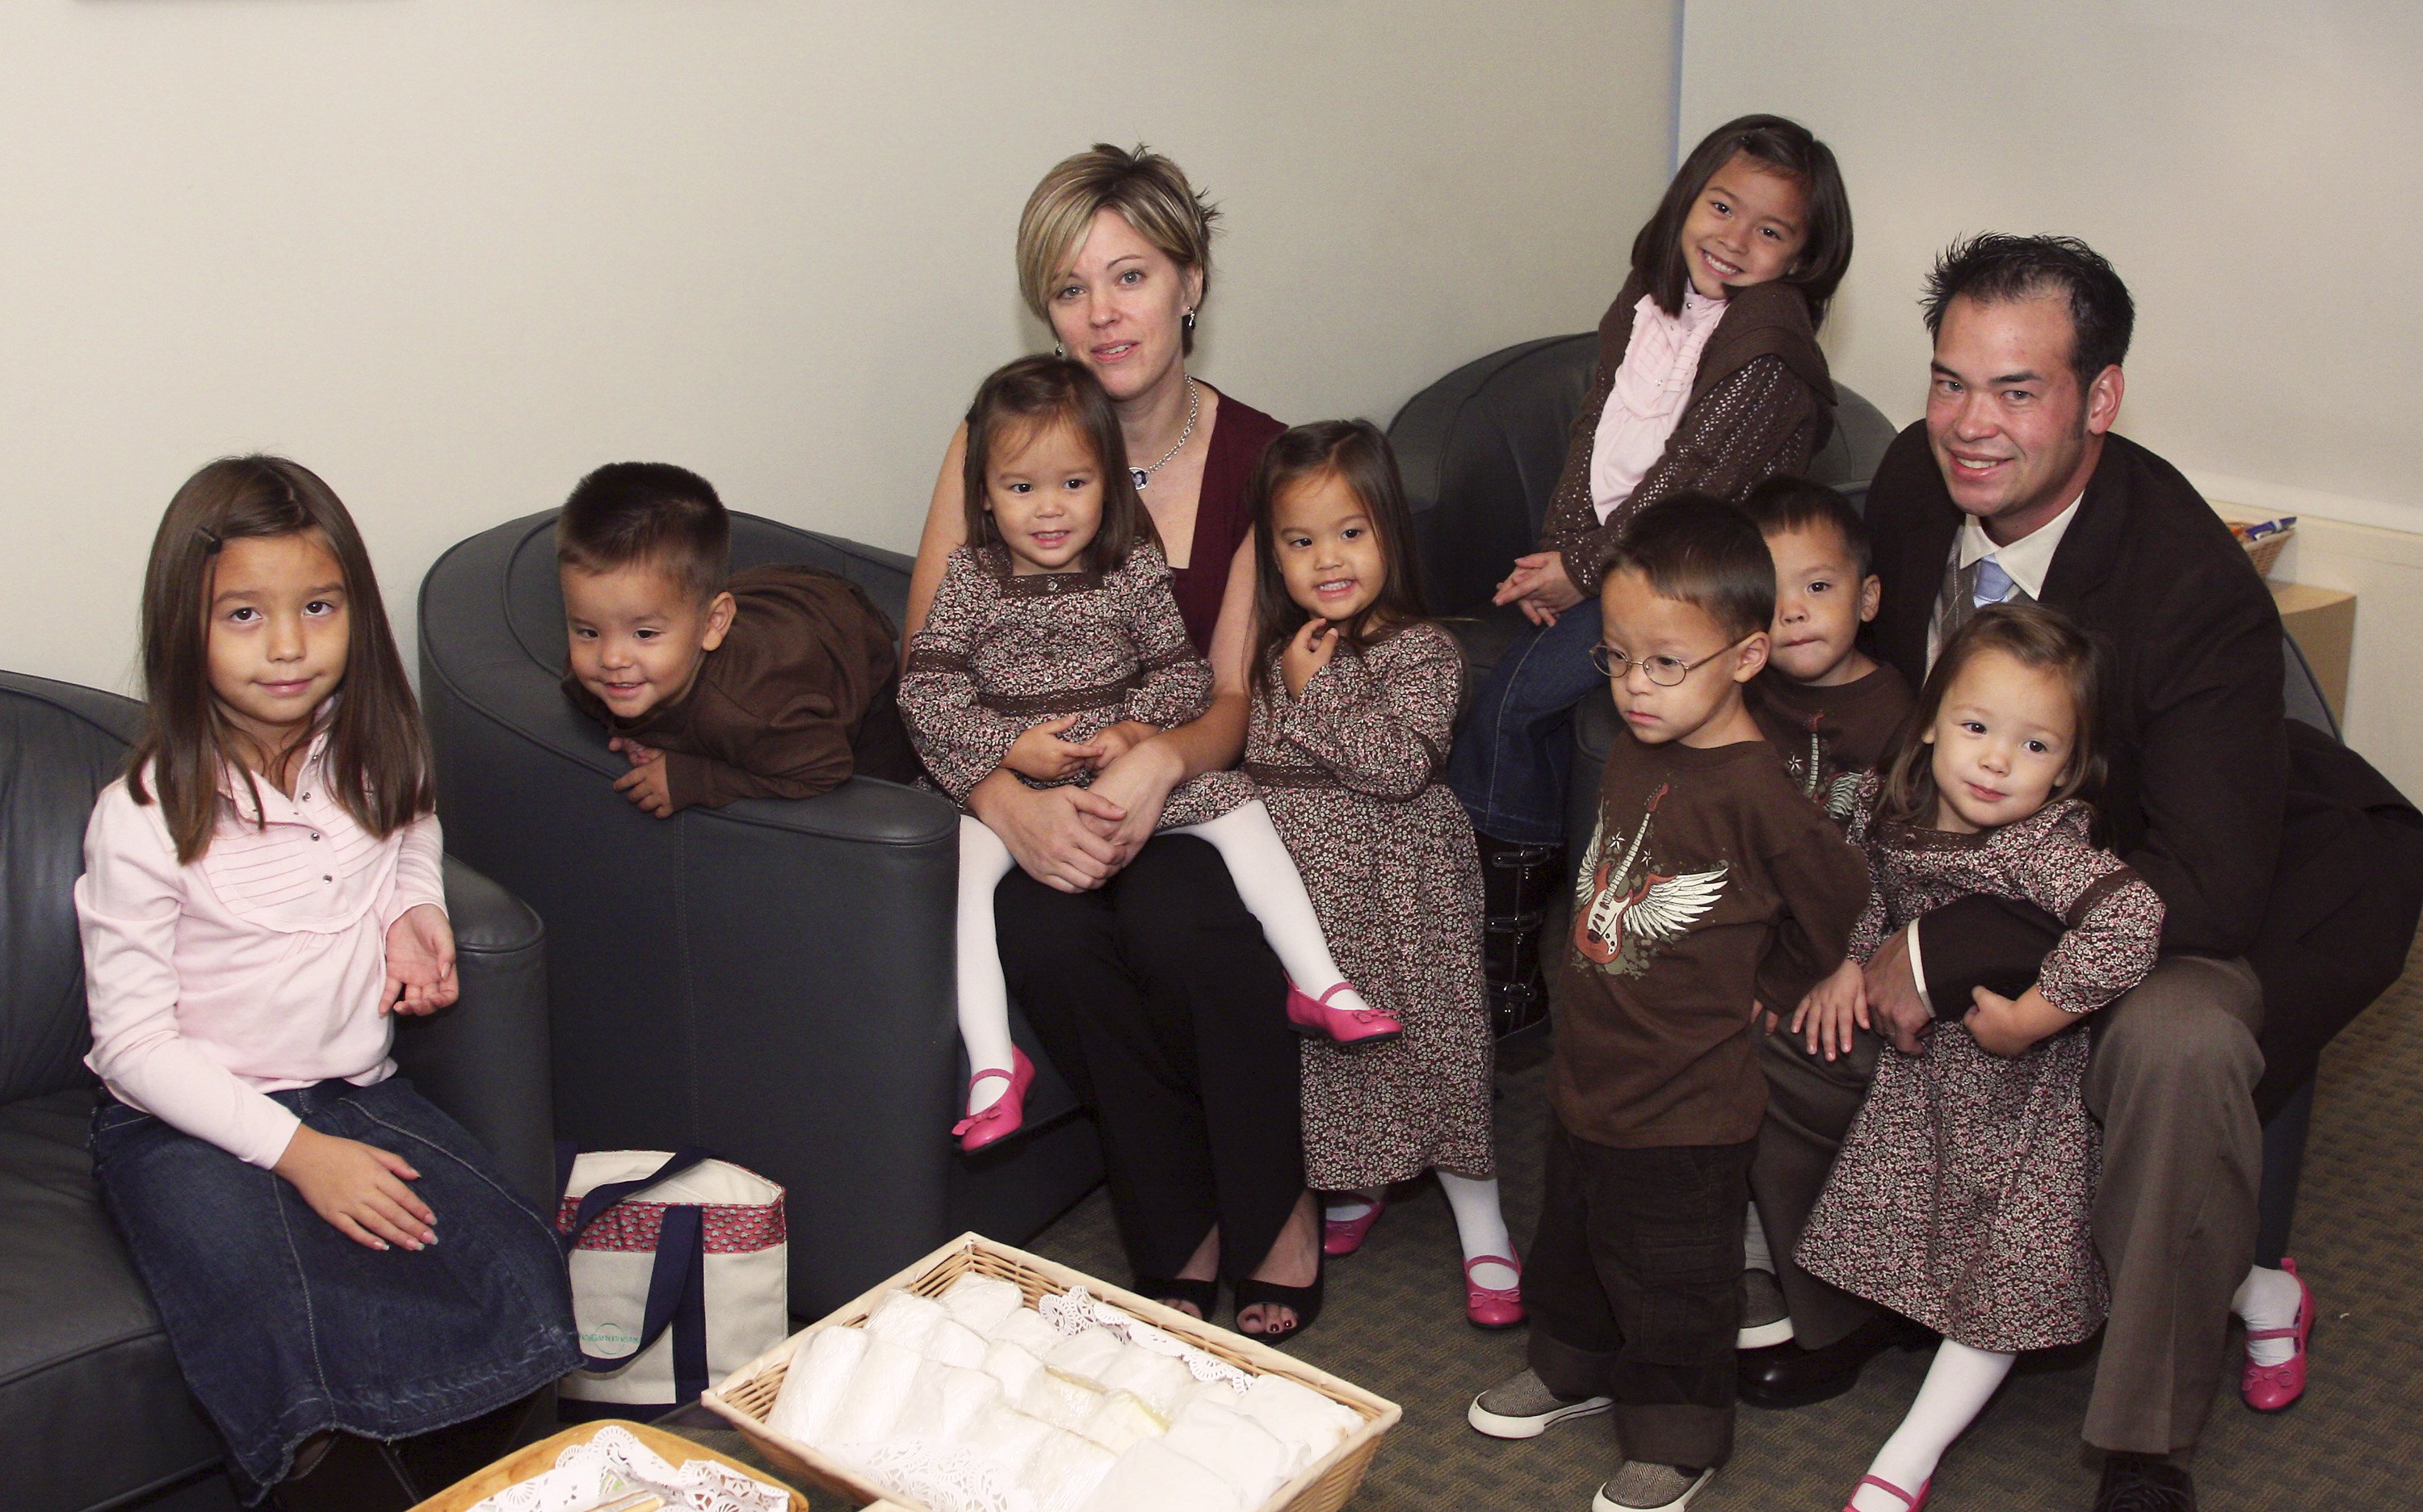 Kate Gosselin, John Gosselin, and their sextuplets on October 2, 2007 | Source: Getty Images